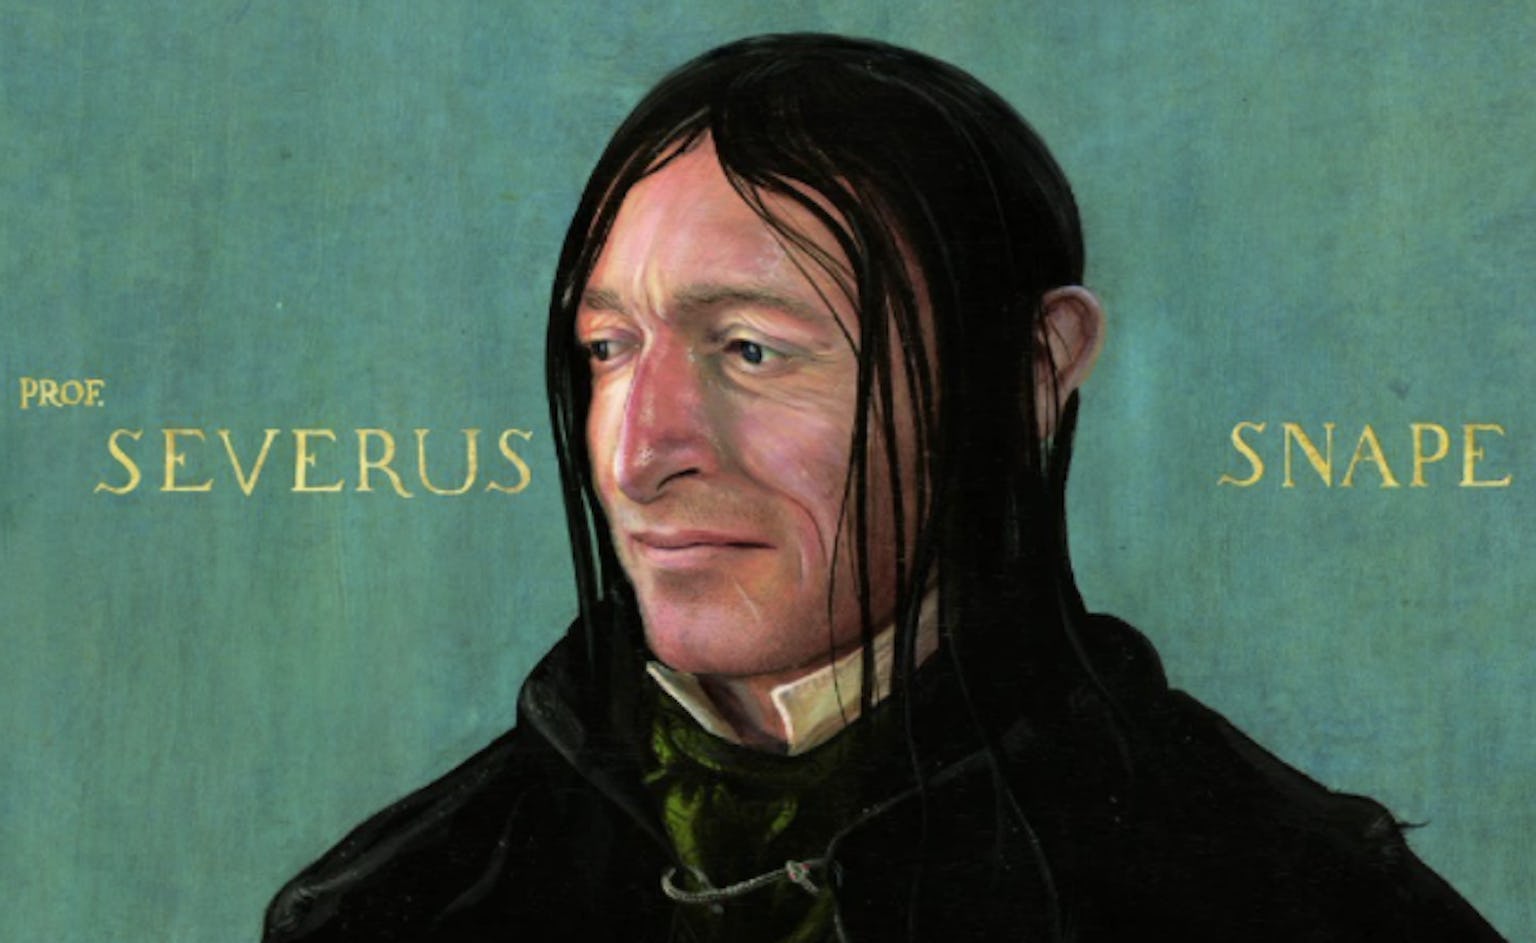 Severus Snape Has a New Look in The Illustrated 'Harry Potter'